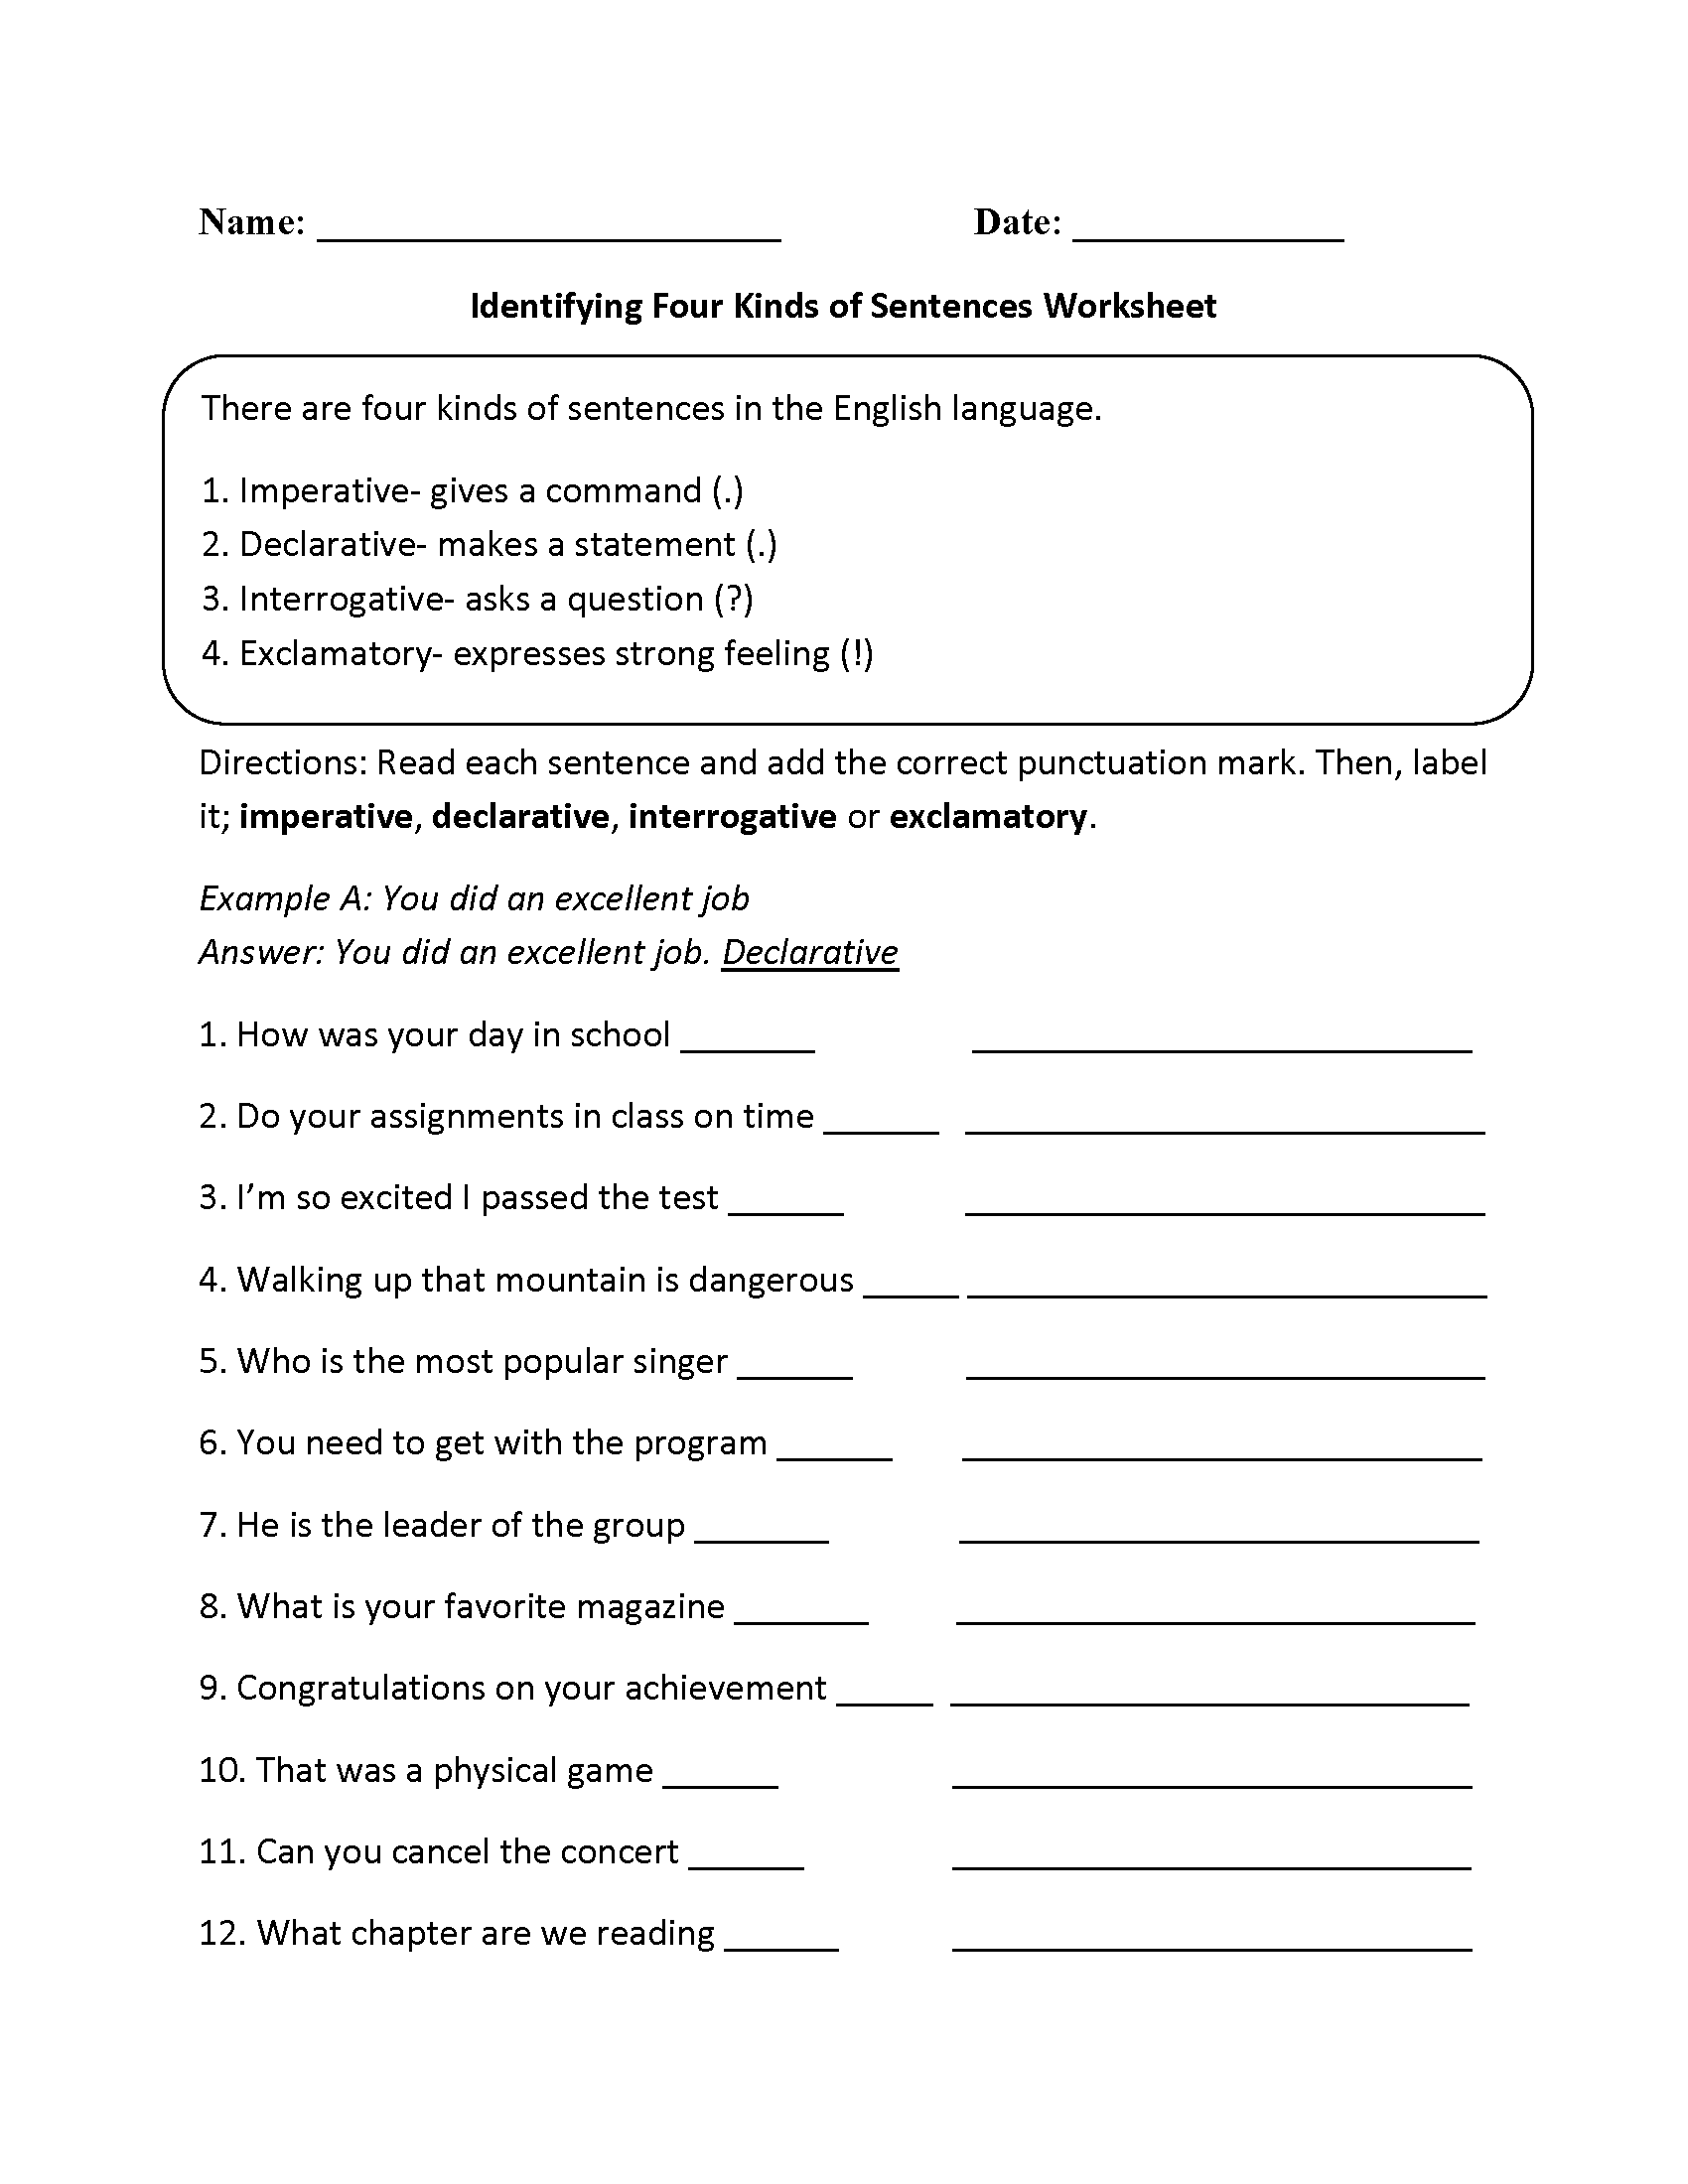 Worksheet On Kinds Of Sentences For Class 3